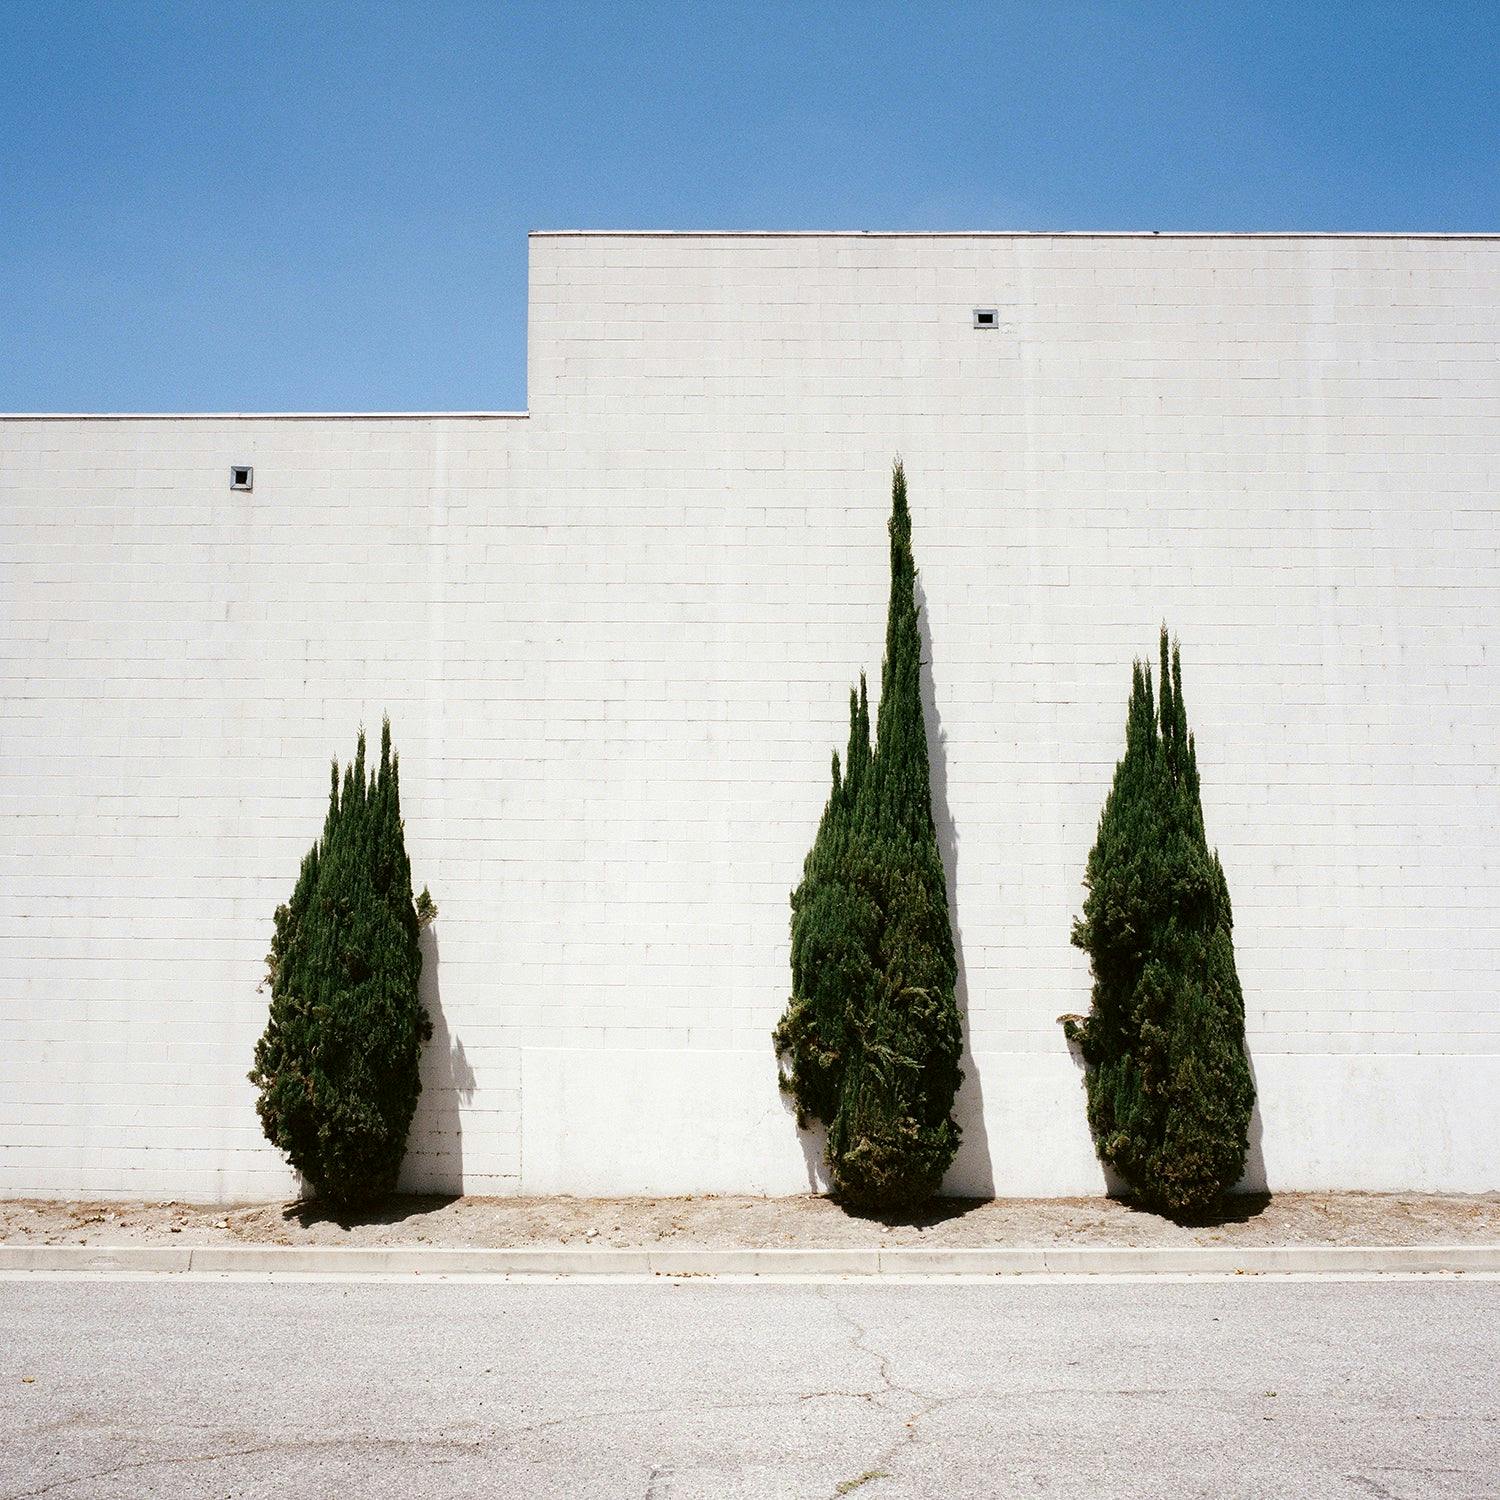 Photography by Sinziana Velicescu titled "El Monte, CA".